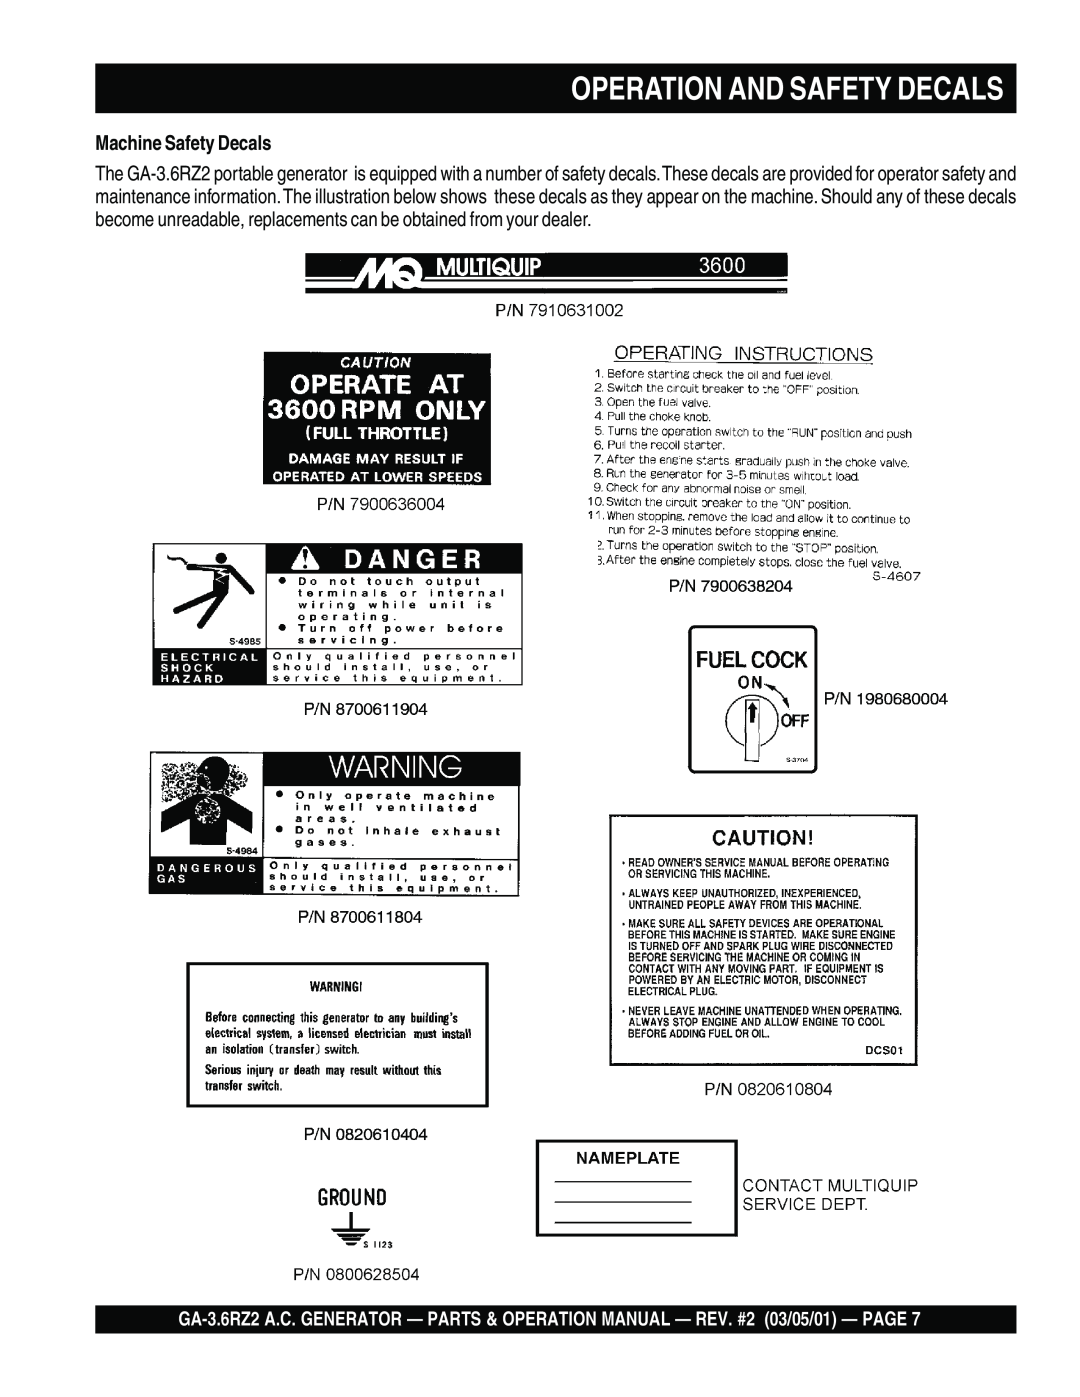 Multiquip GA-3.6RZ2 operation manual Operation And Safety Decals, Machine Safety Decals 